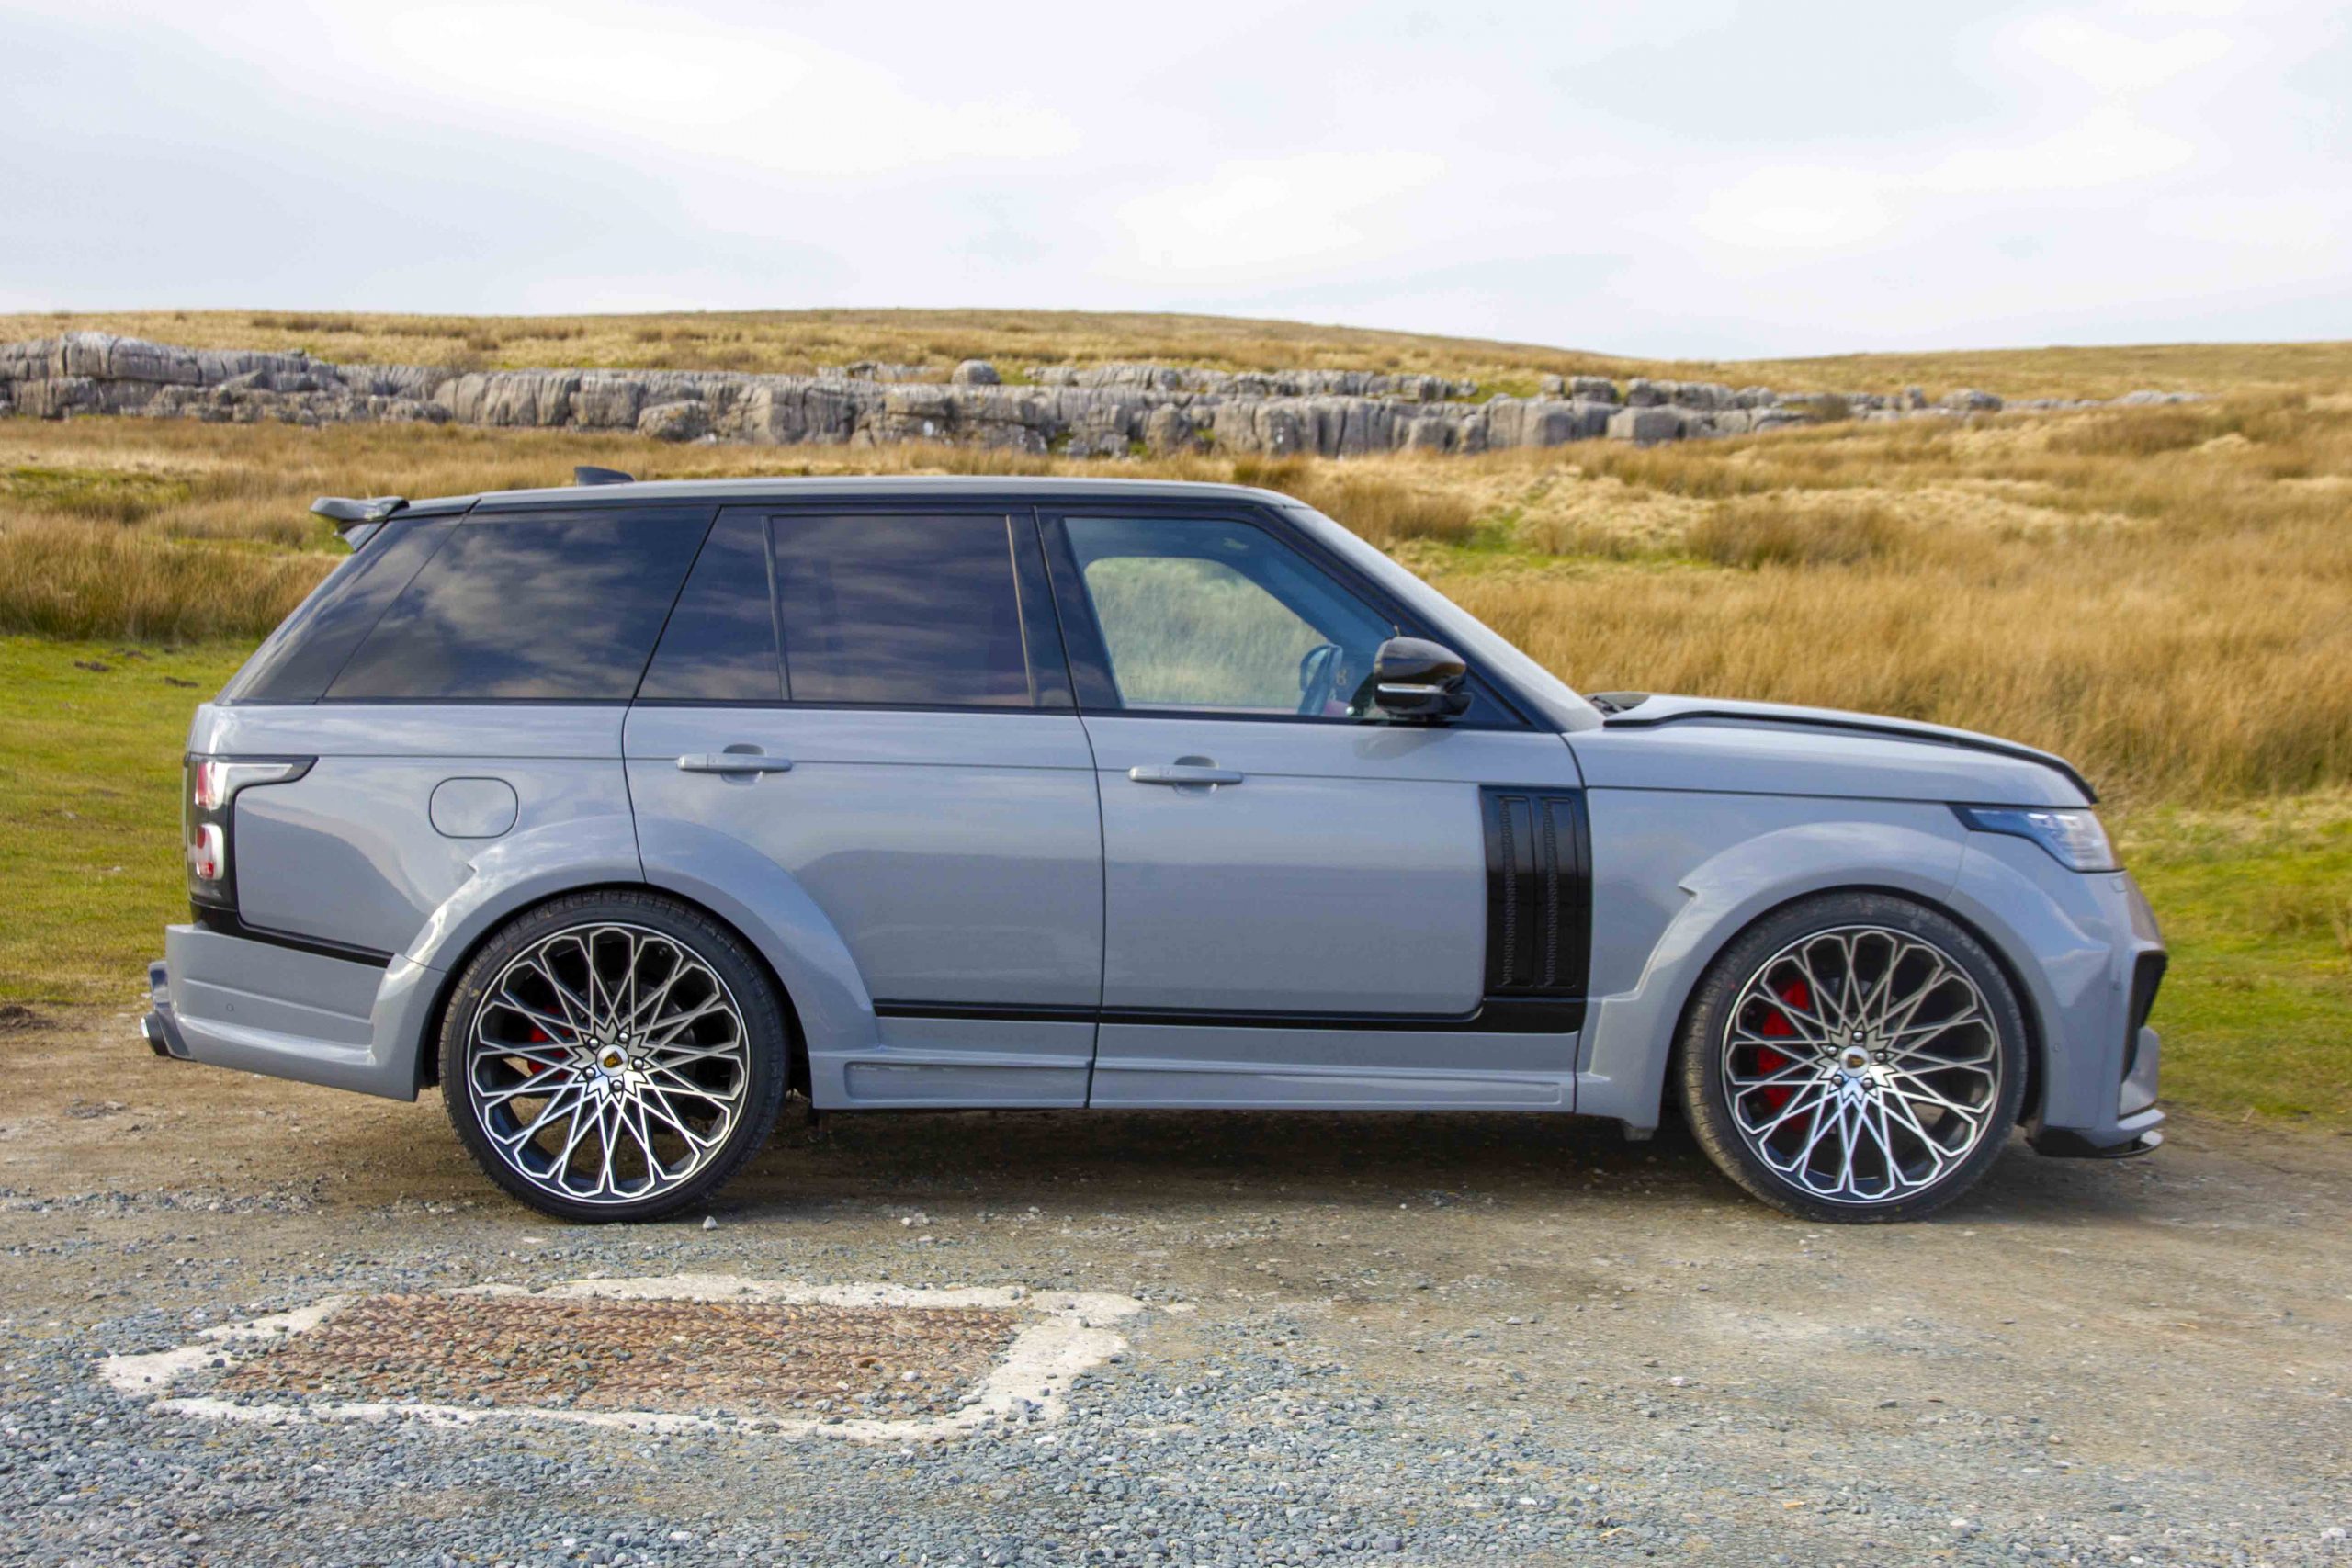 Check our price and buy Barugzai Bison Wide Edition body kit for Land Rover Range Rover Vogue (2019+)